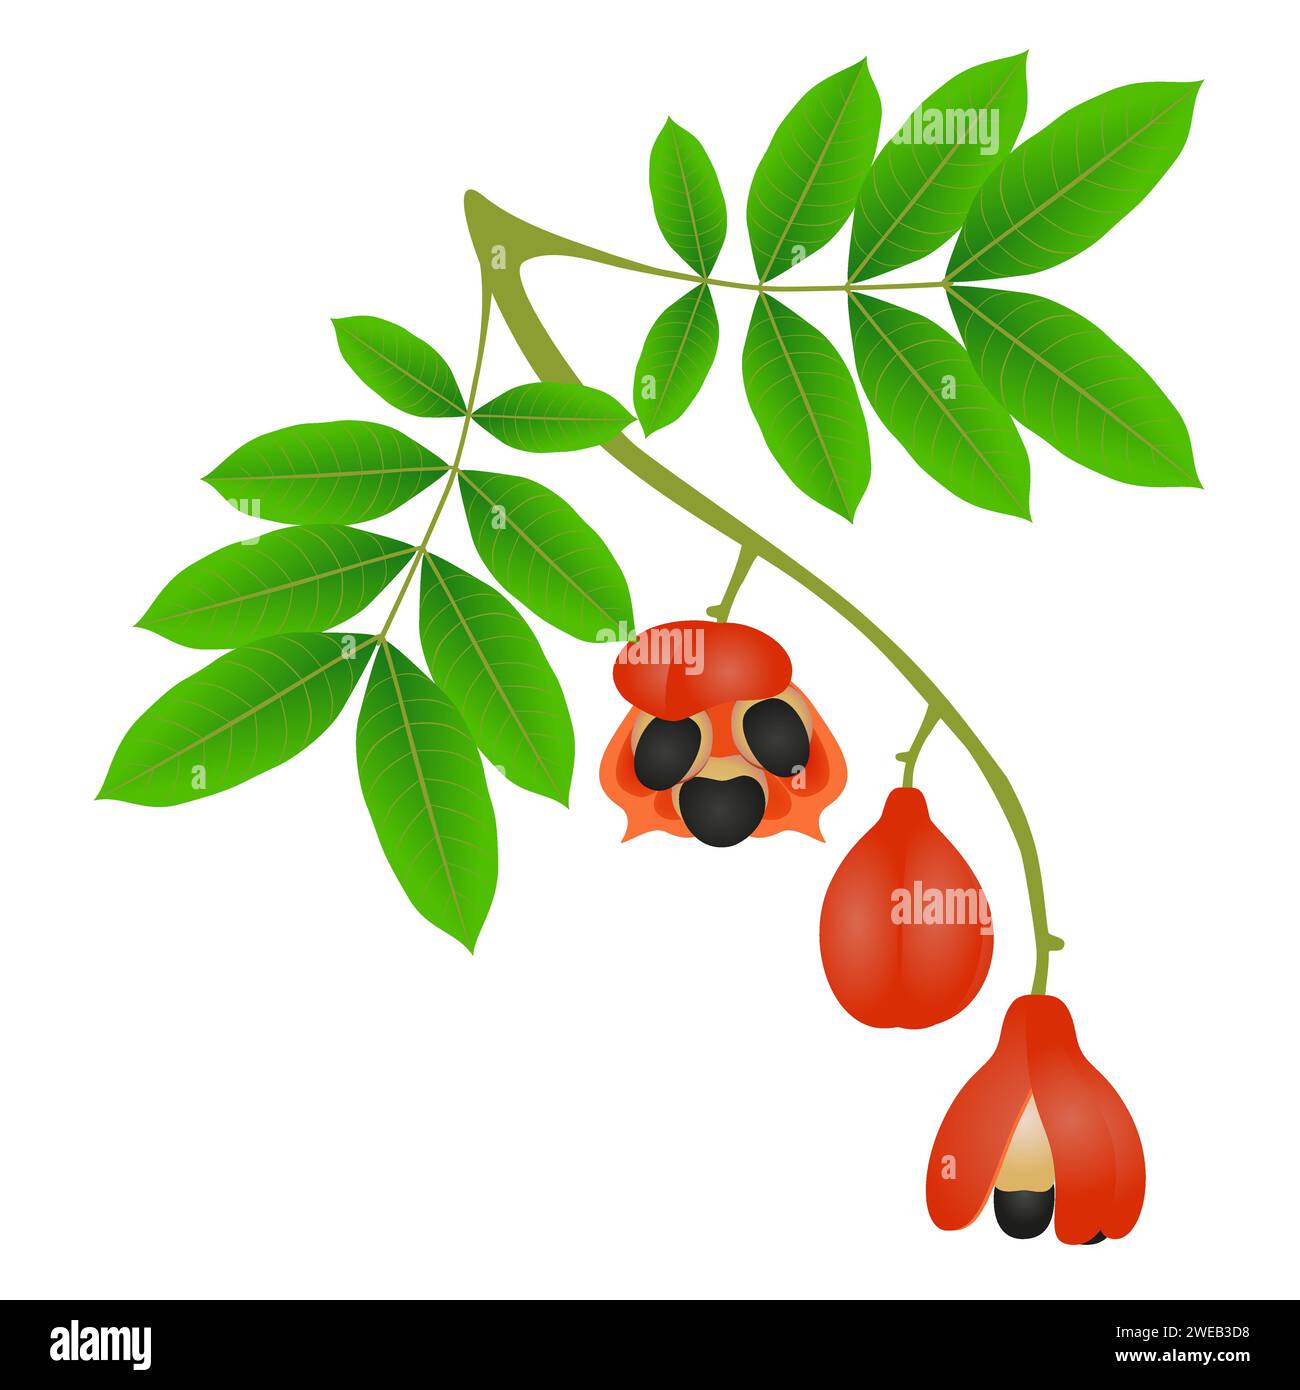 Branch with fruits and ackee leaves on a white background. Stock Vector